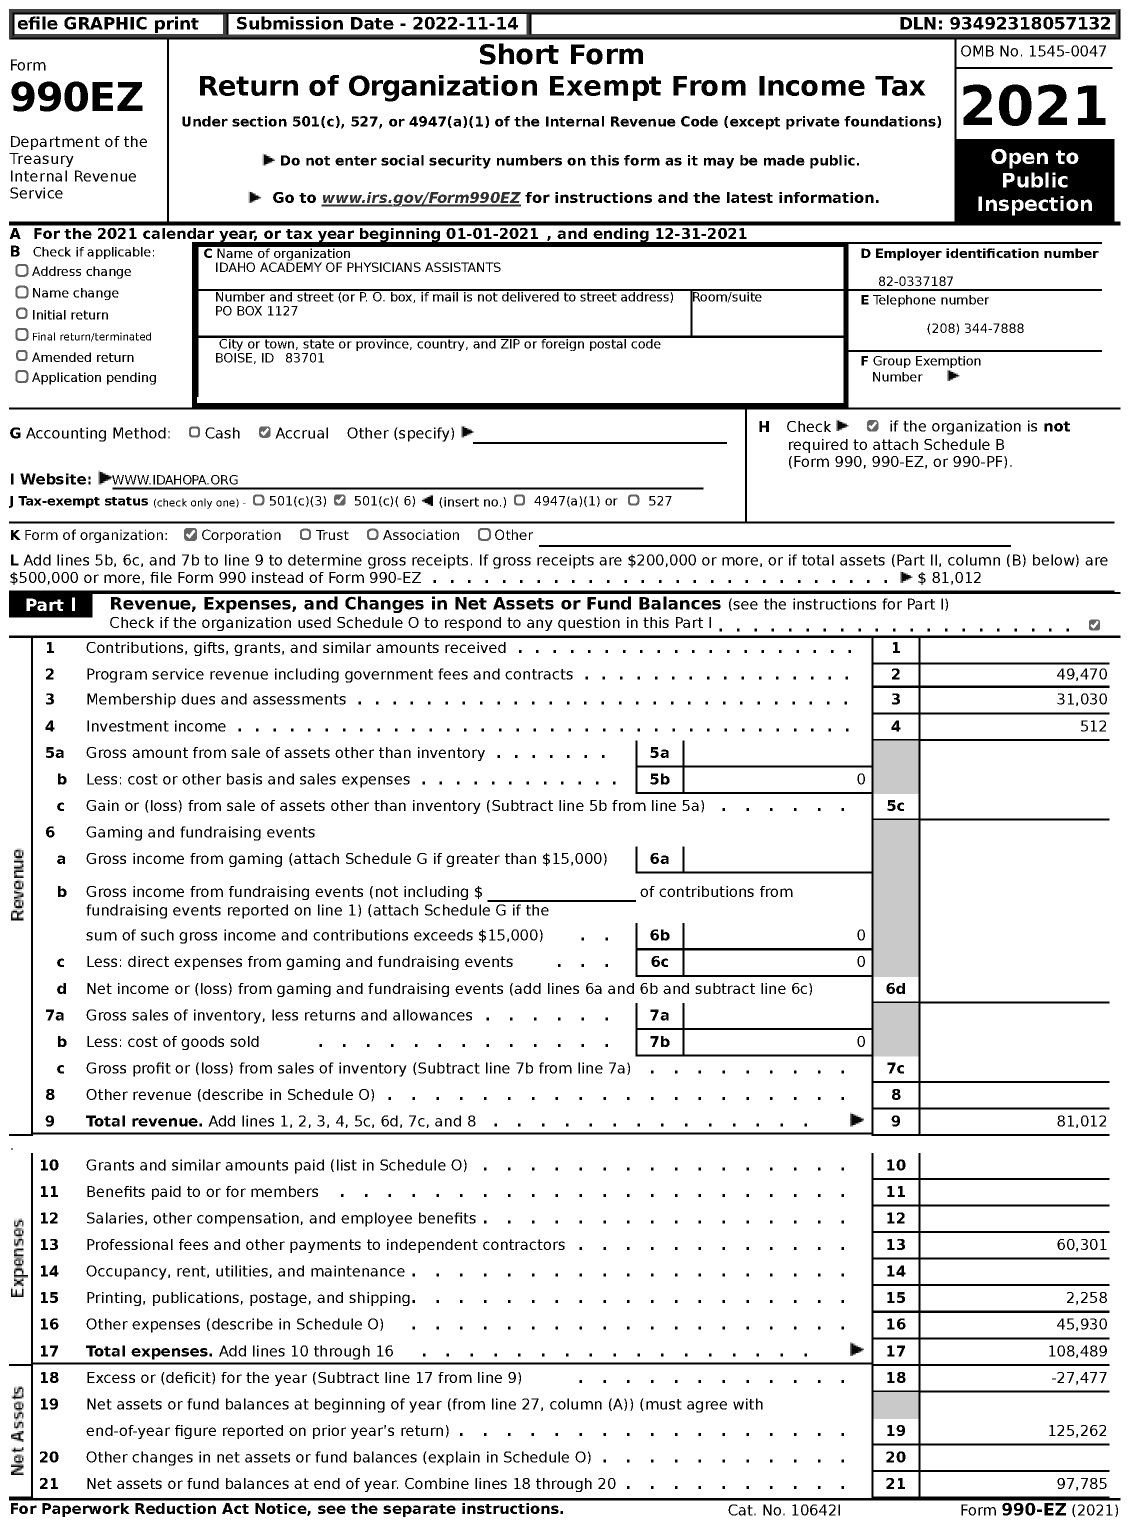 Image of first page of 2021 Form 990EZ for Idaho Academy of Physicians Assistants